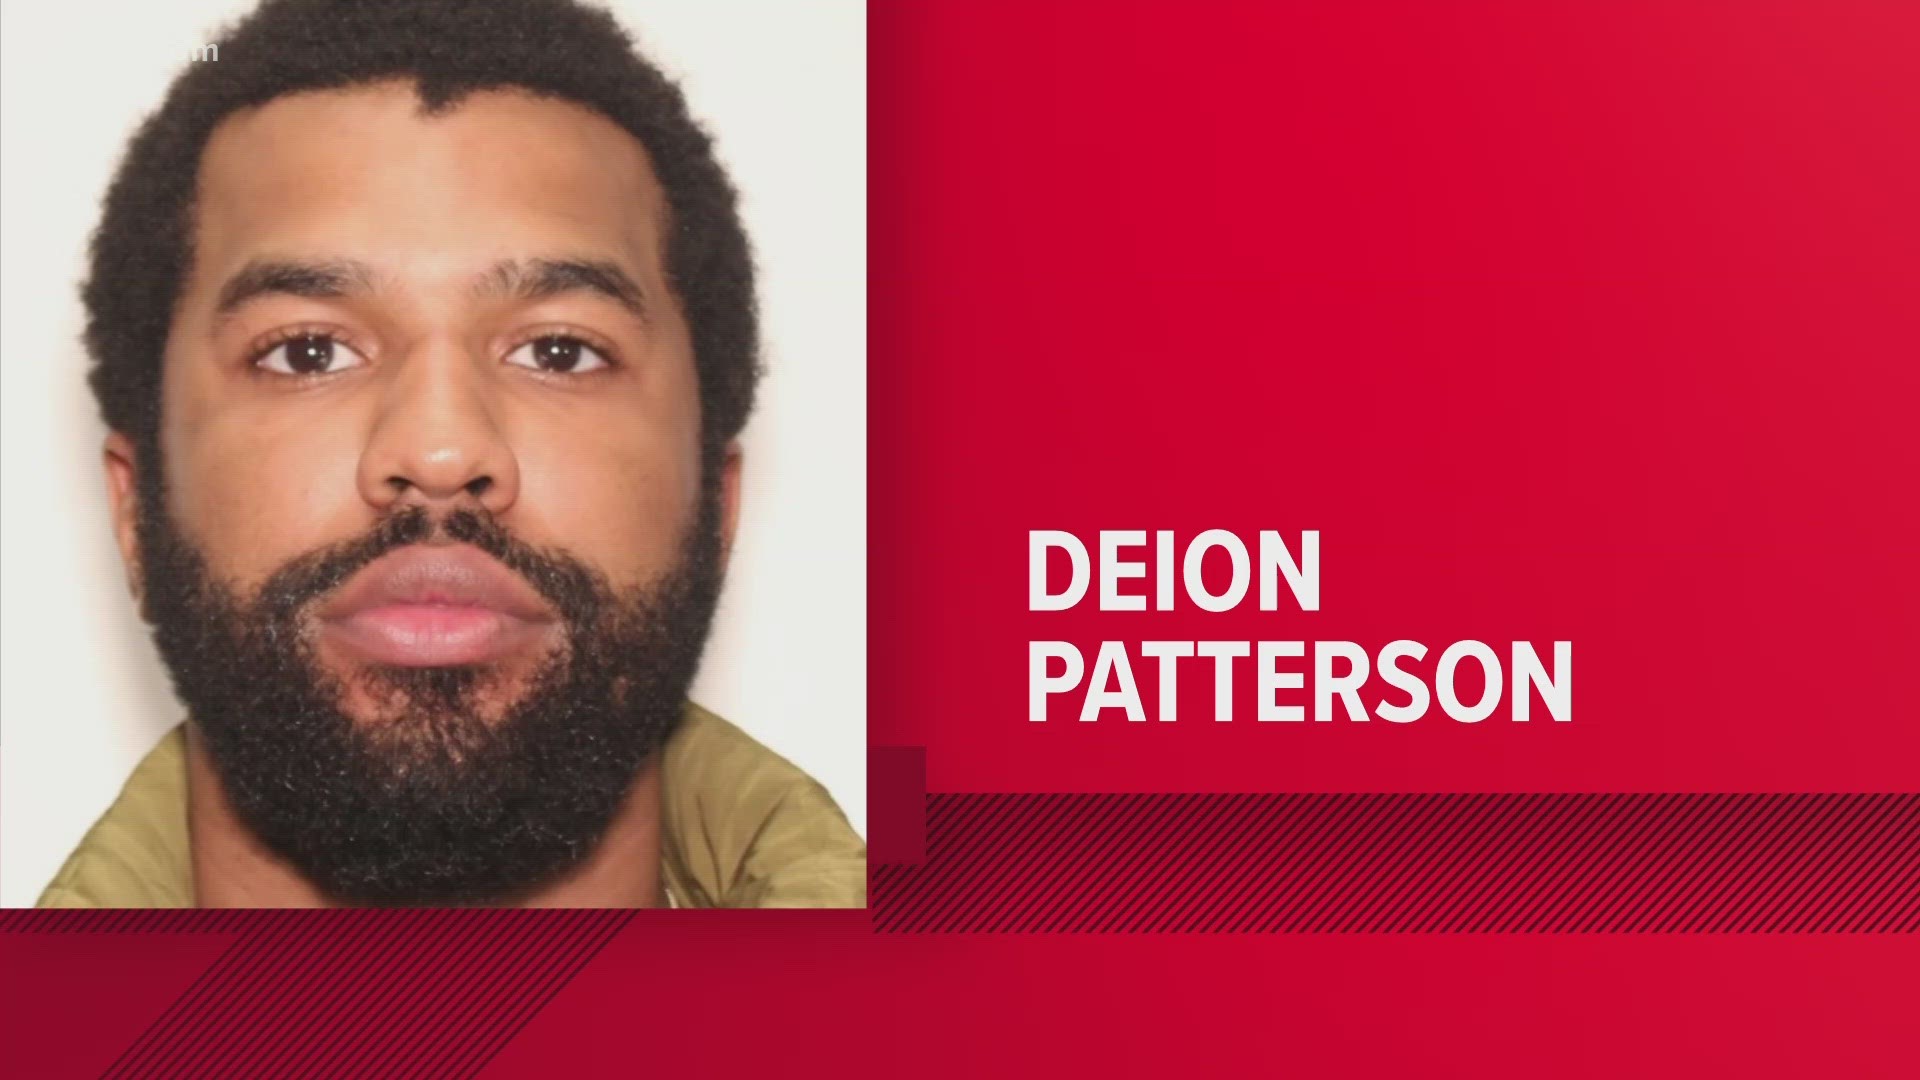 Authorities said Deion Patterson shot five women on the 11th floor of a Northside Medical building.